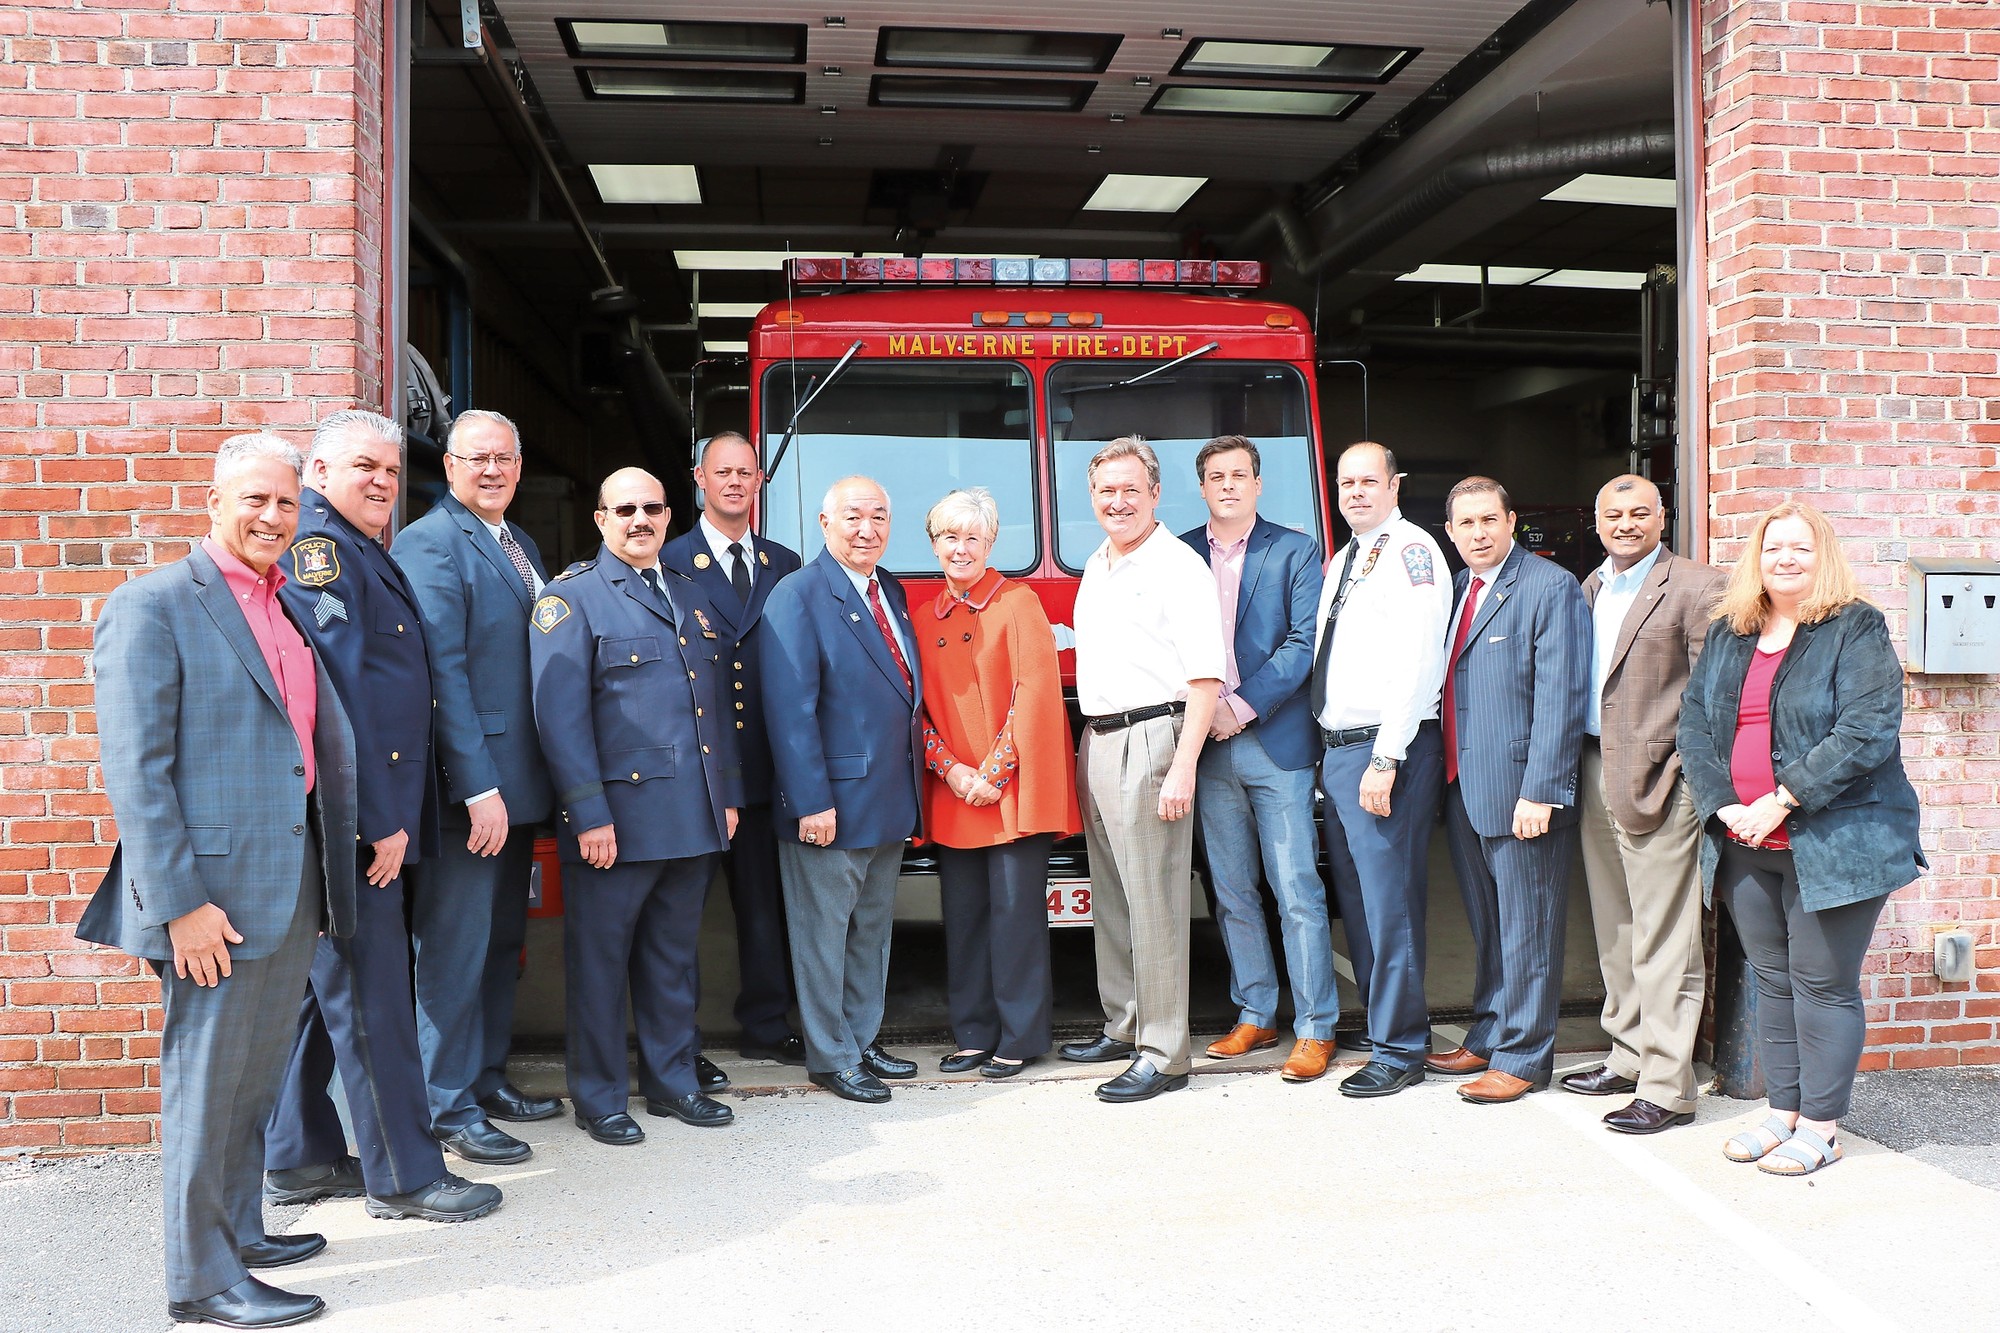 Some of Malverne's emergency response workers with Mayor McDonald, village residents and corporate officials at an event in late April at the Malverne Firehouse.